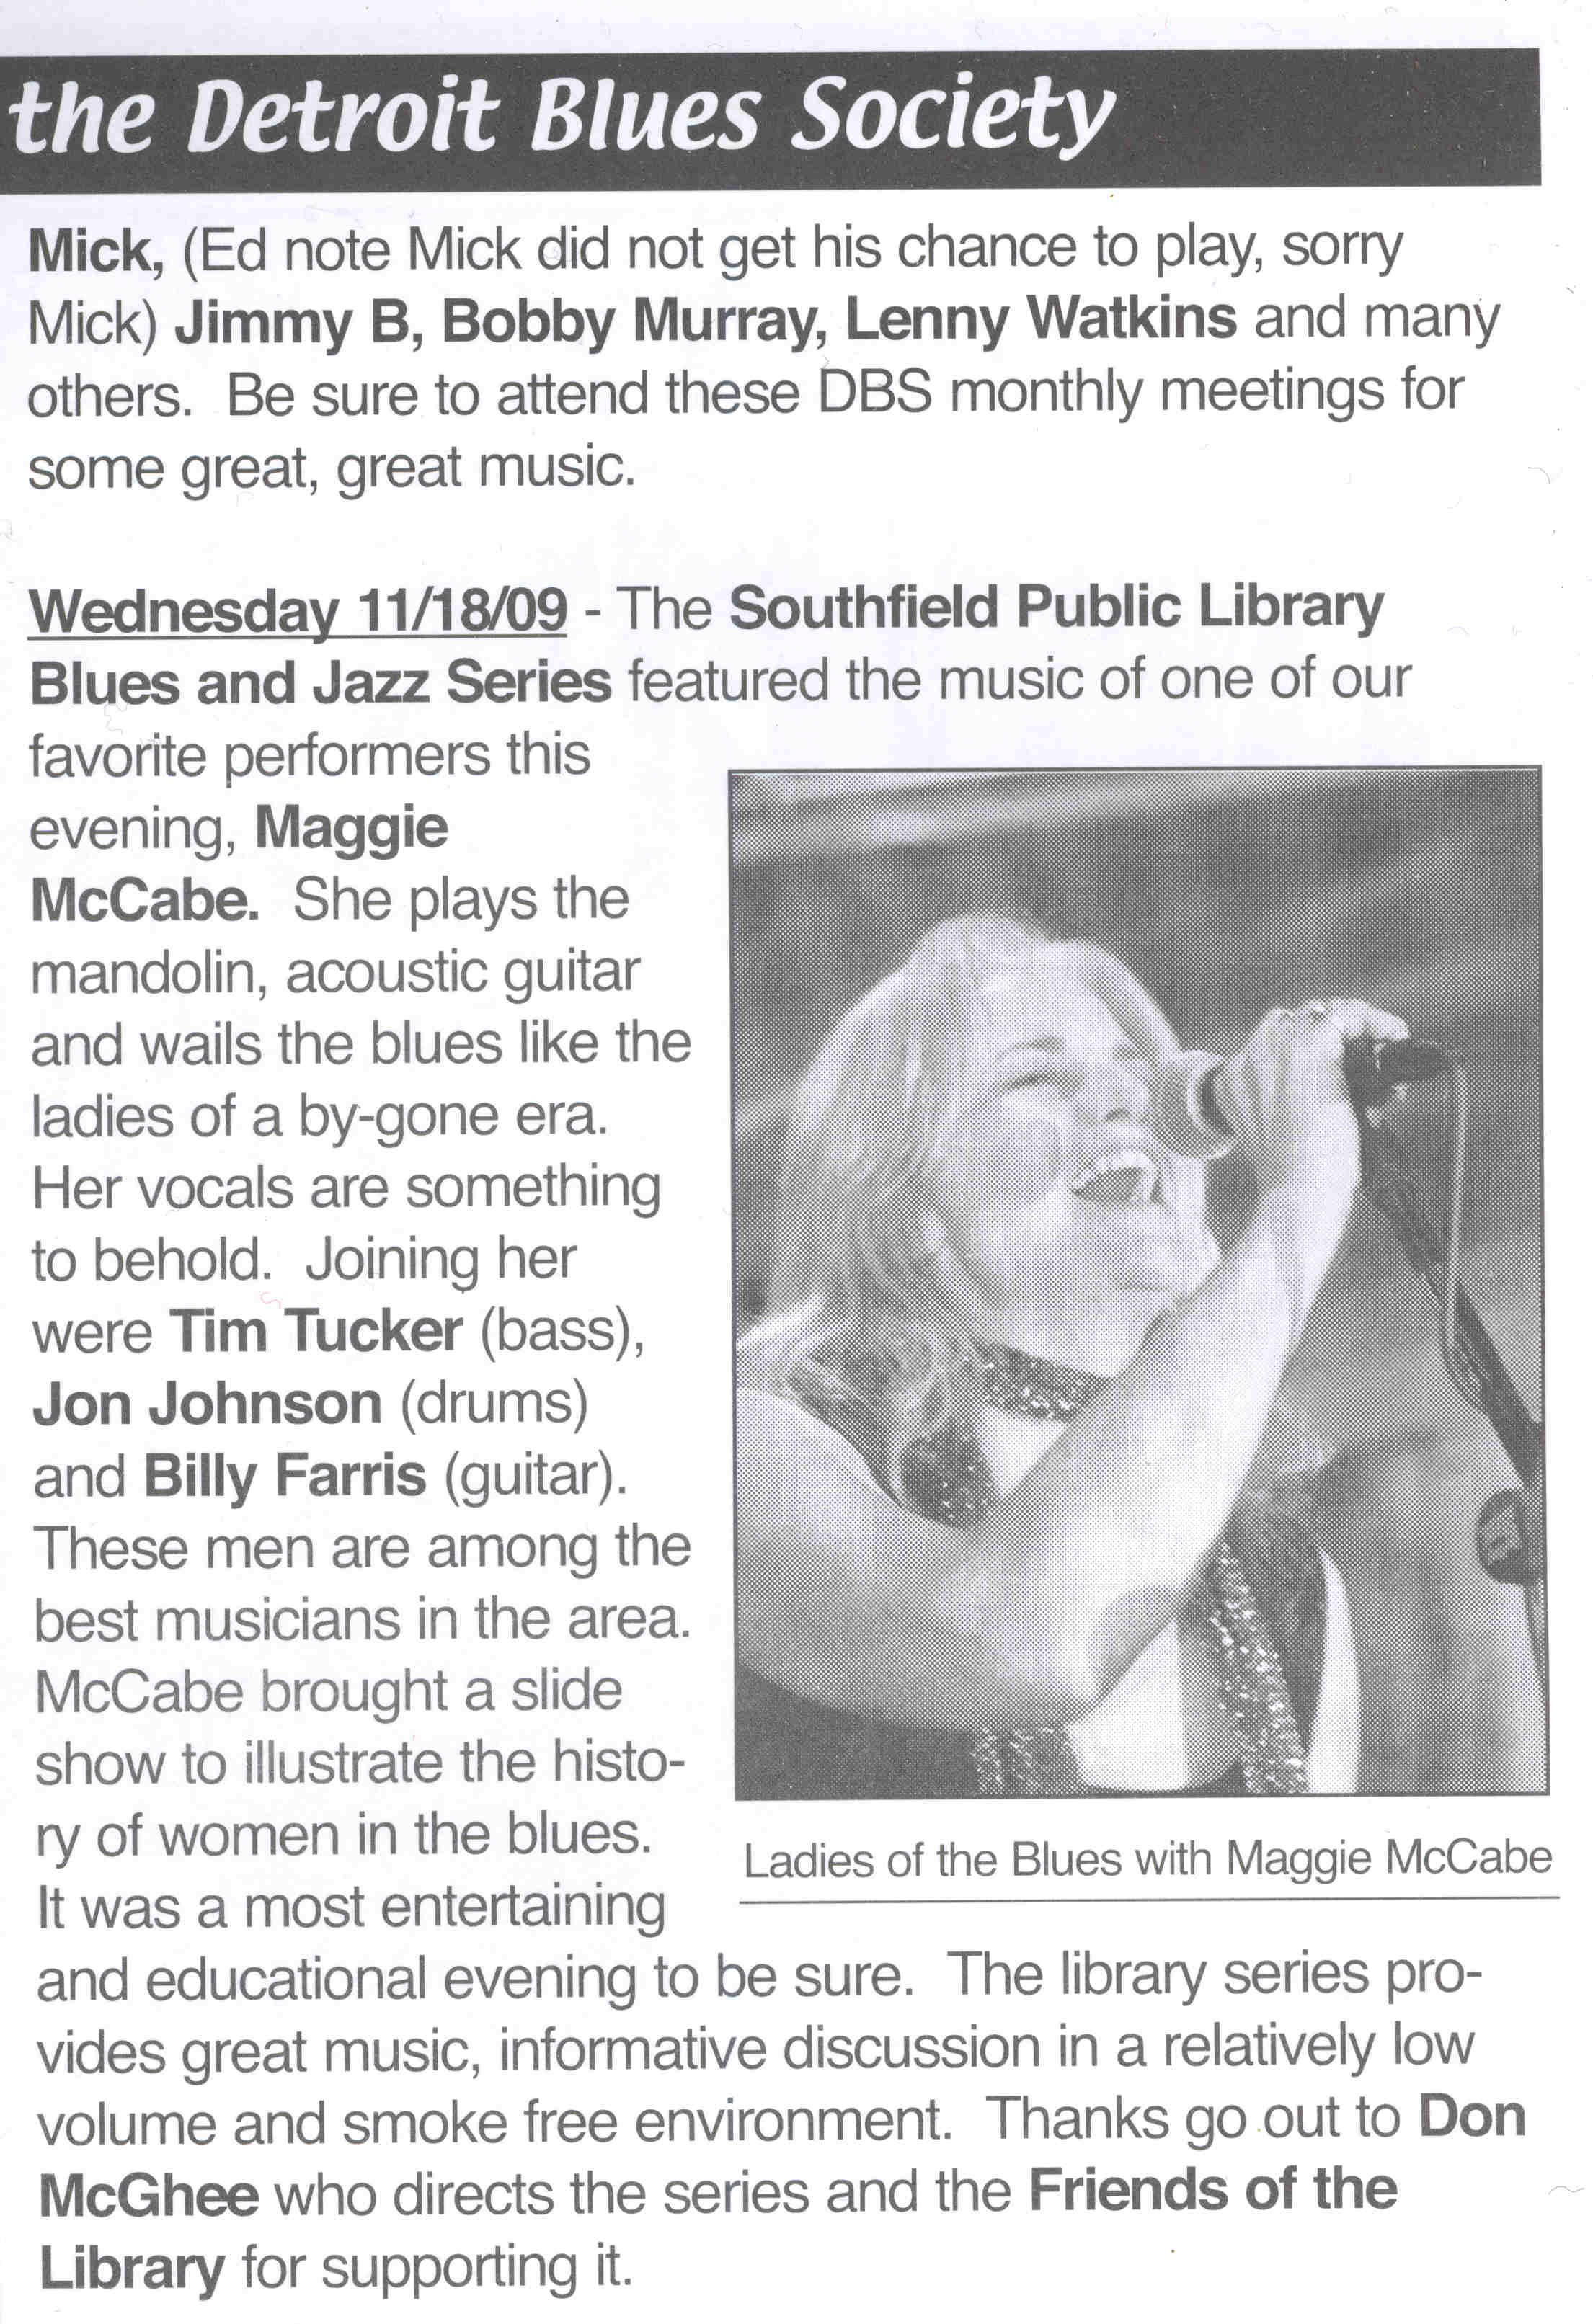 Detroit Blues Society Article about "Women of the Blues".